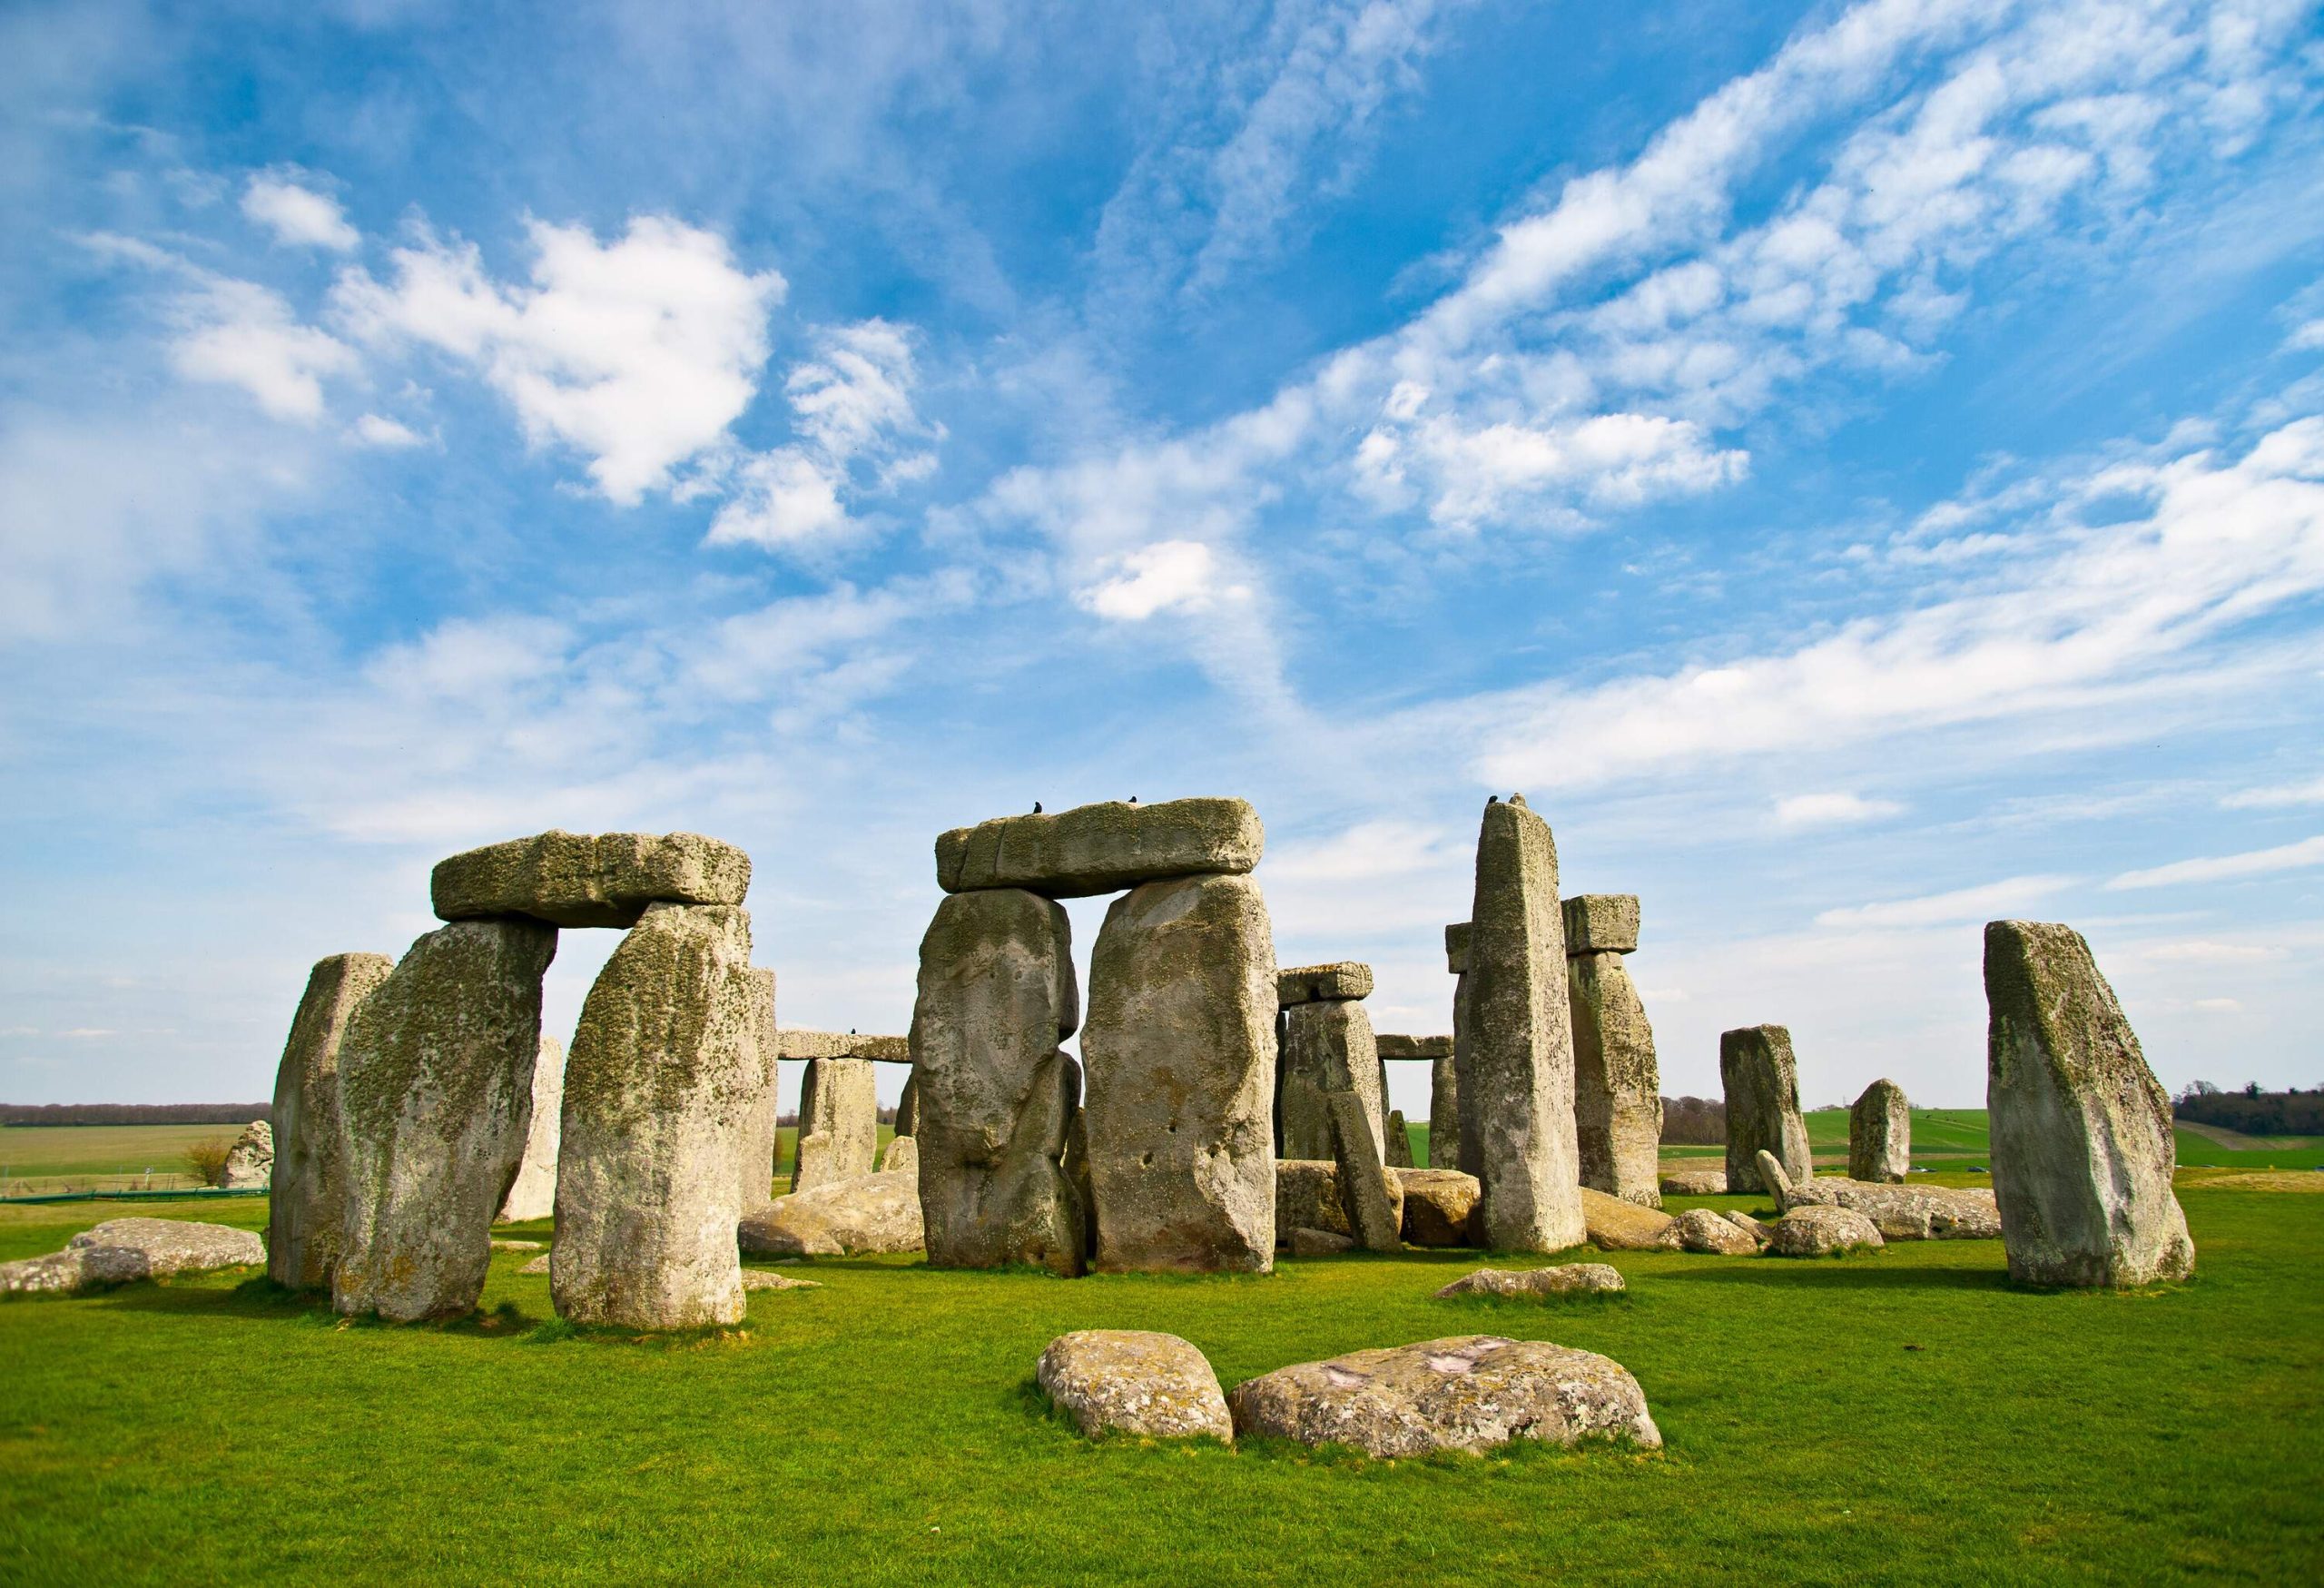 A world-famous prehistoric landmark name Stonehenge in England consists of enormous standing stones topped by connecting horizontal stones.